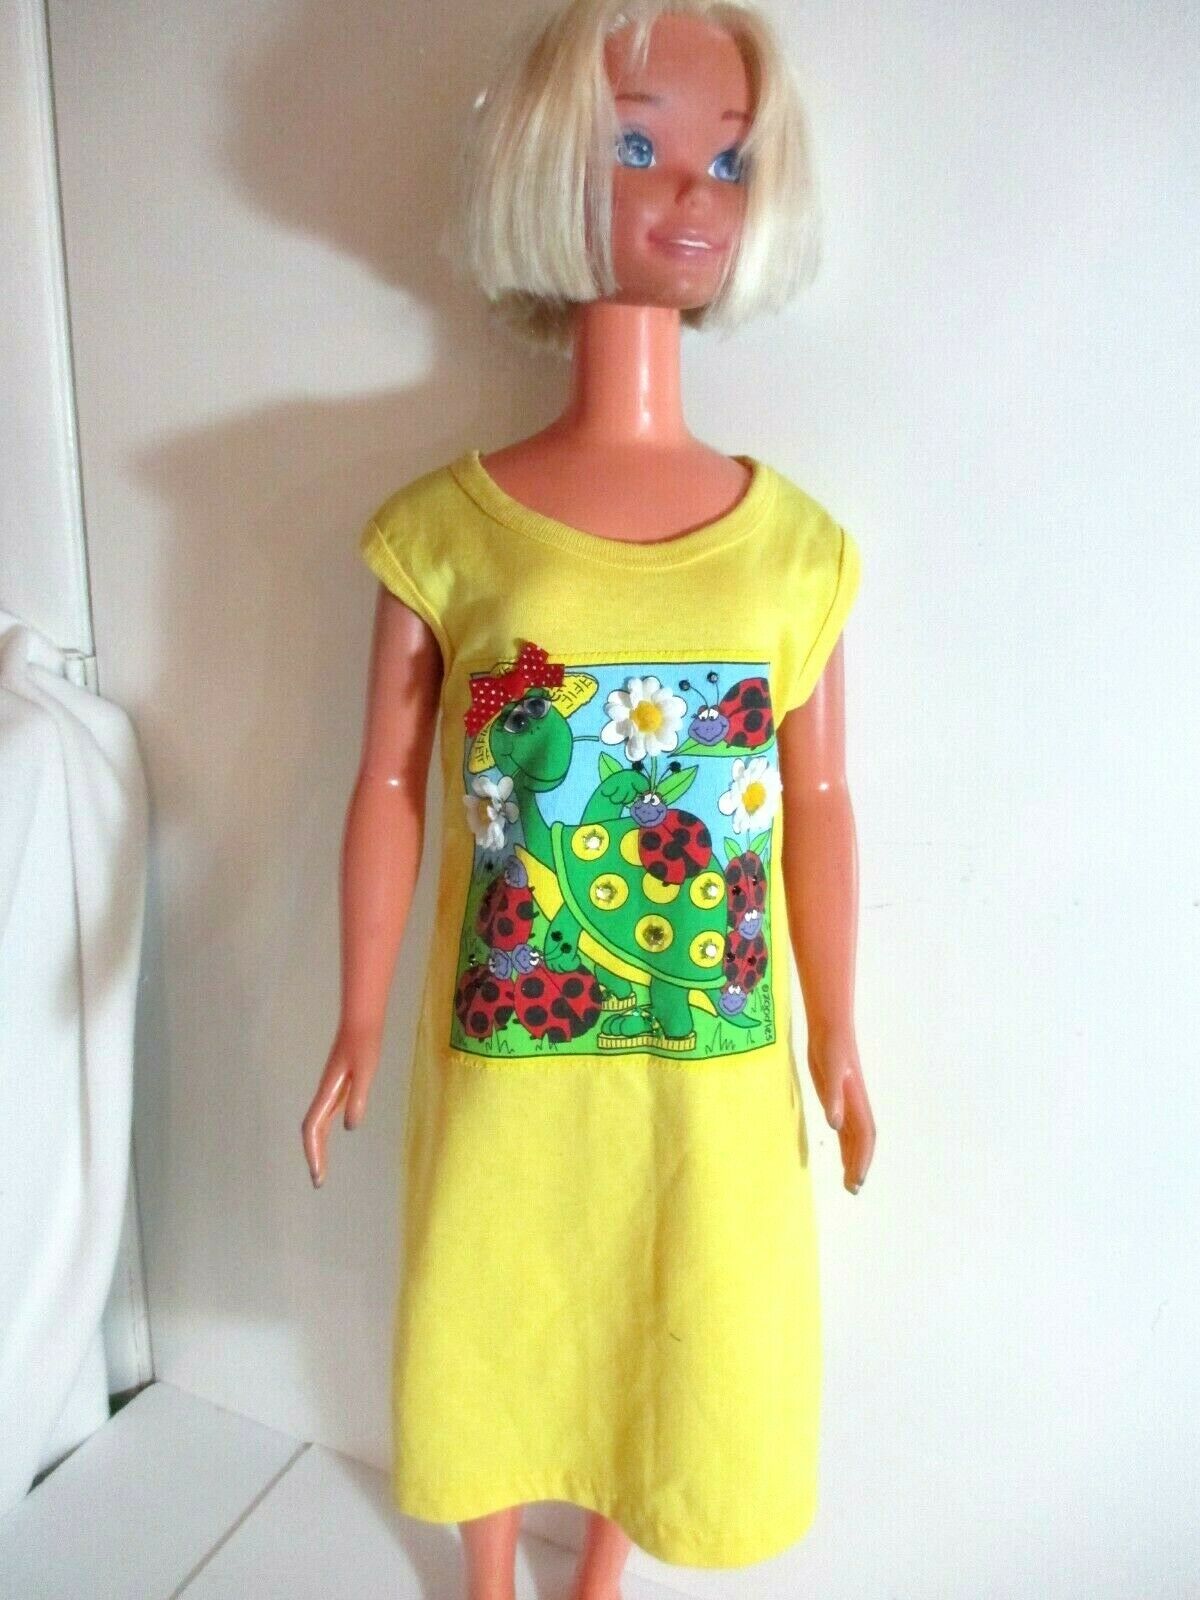 My Size Barbie 36" Doll Dress Yellow With Green Turtle Red Lady Bugs Sunflowers